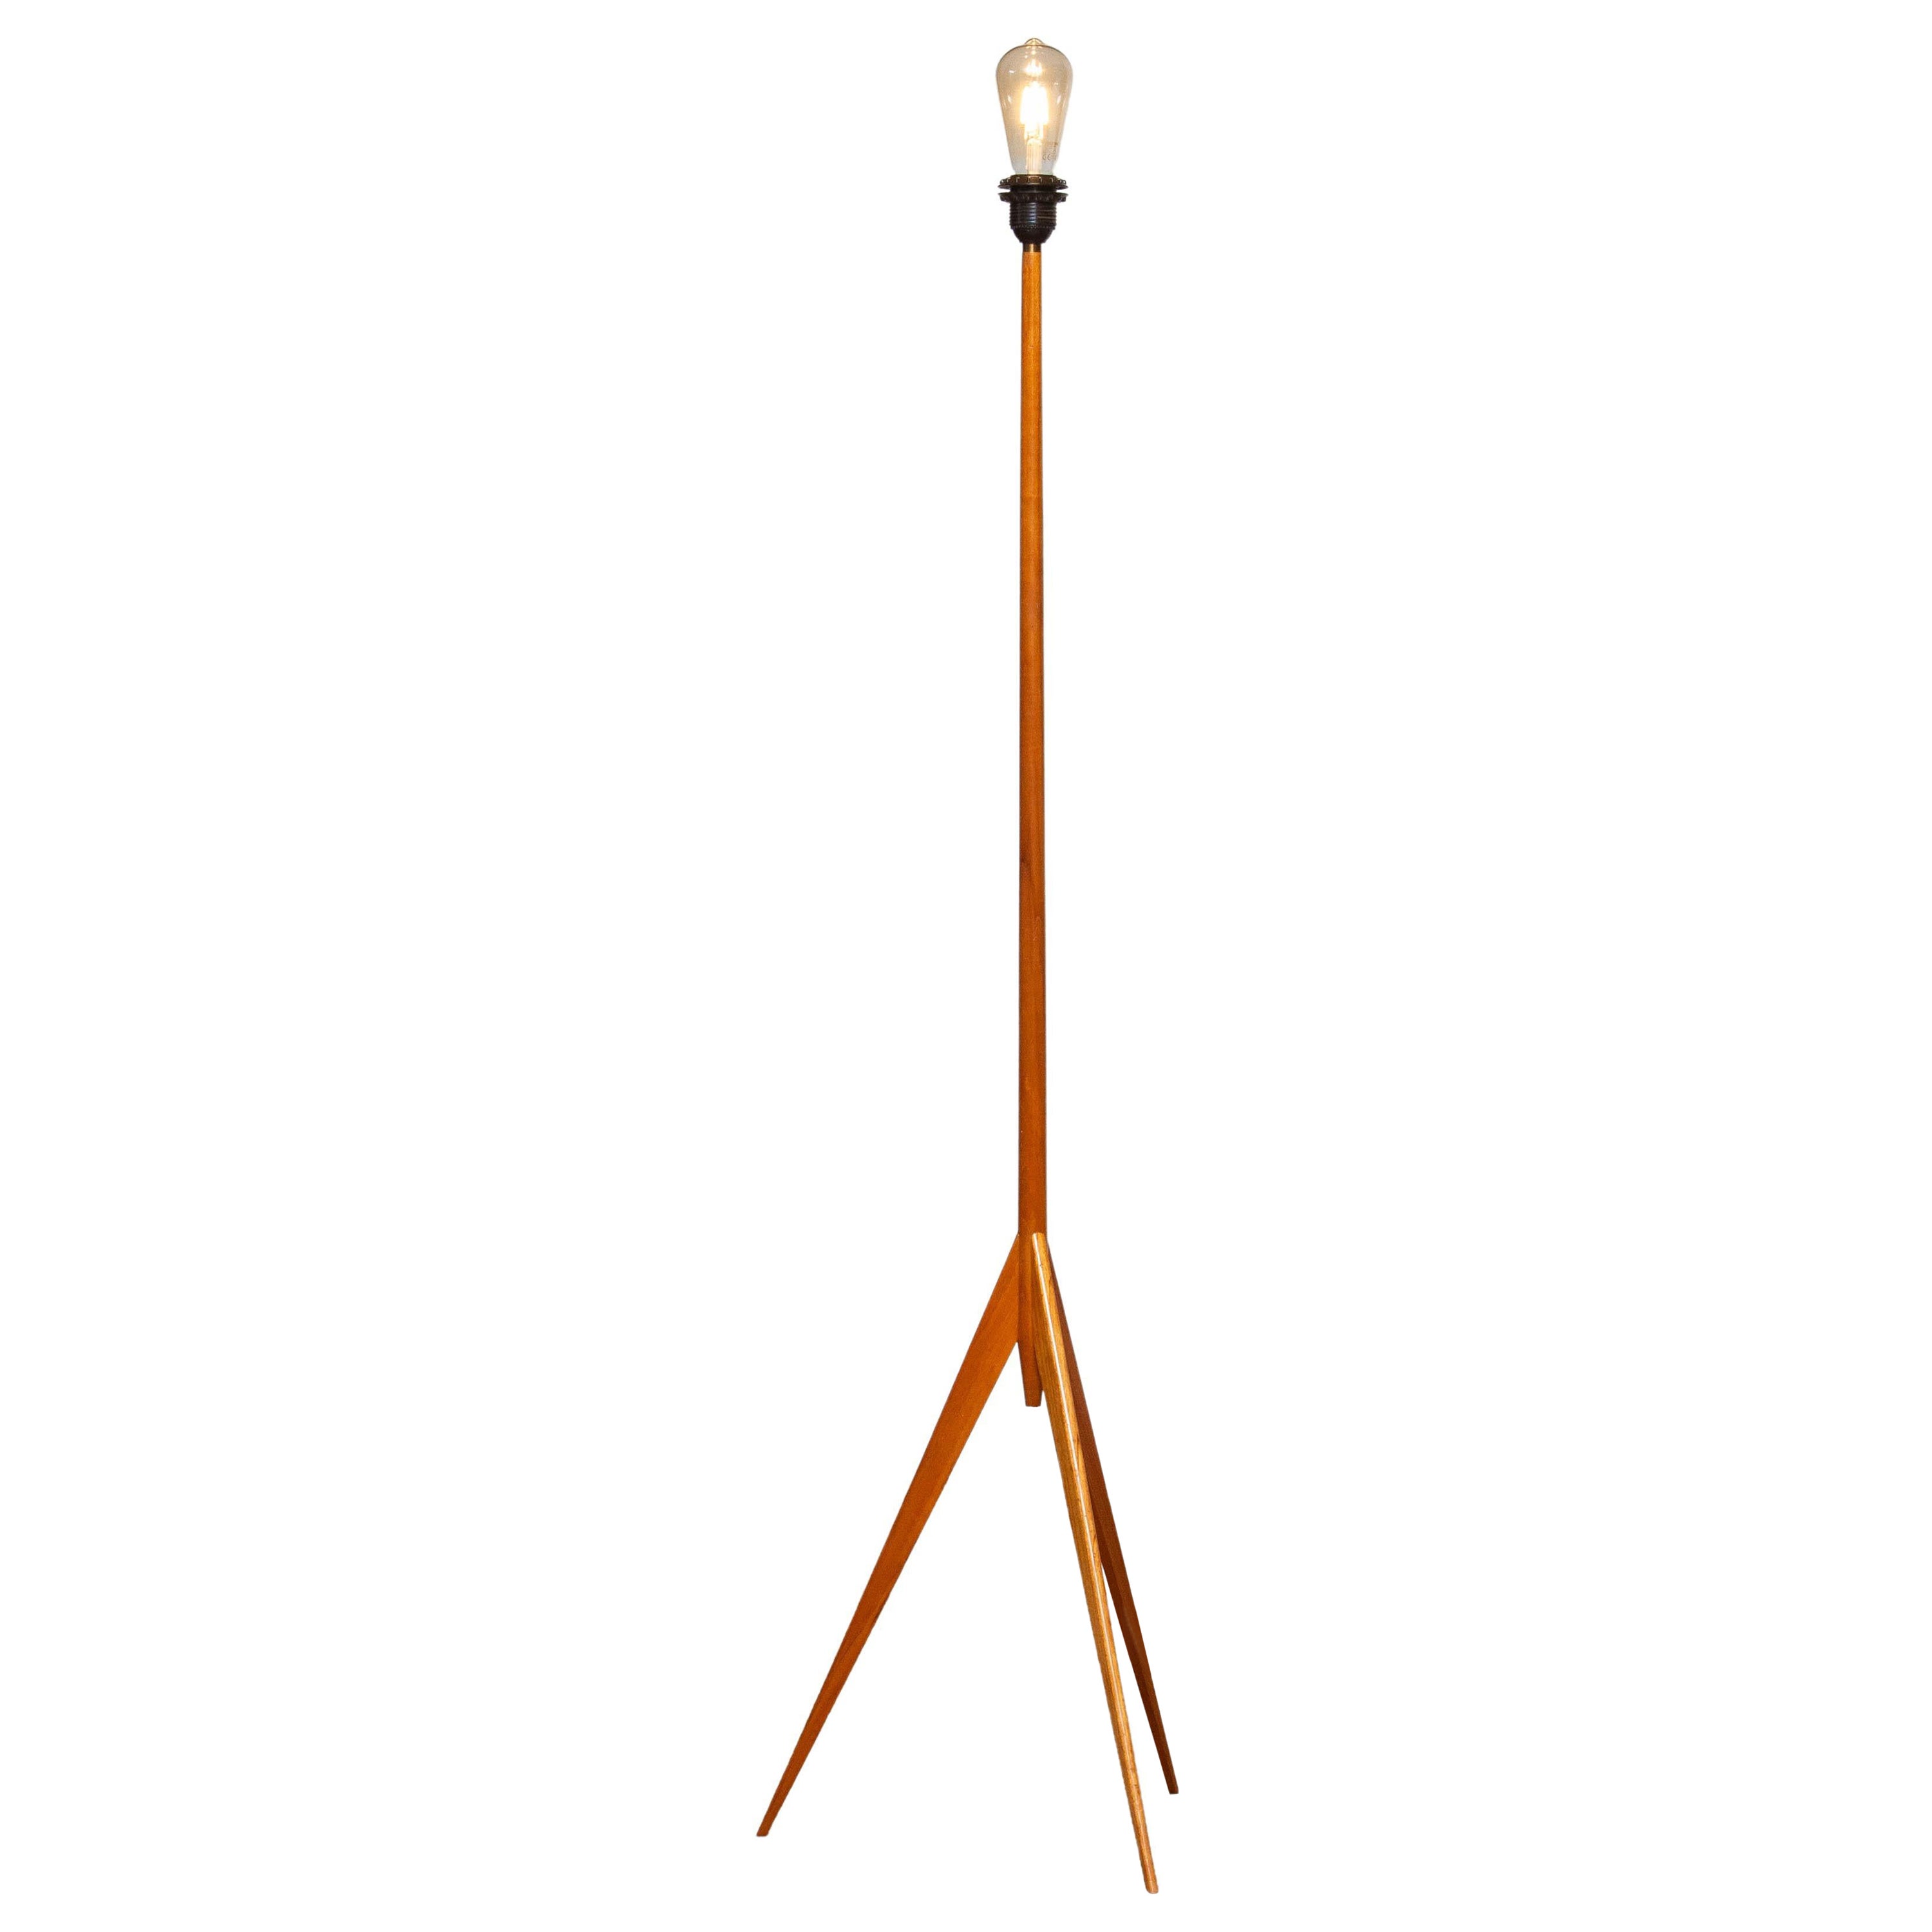 1960s Slim and Tall Scandinavian Teak Tripot Floor Lamp by Luxus from Sweden For Sale